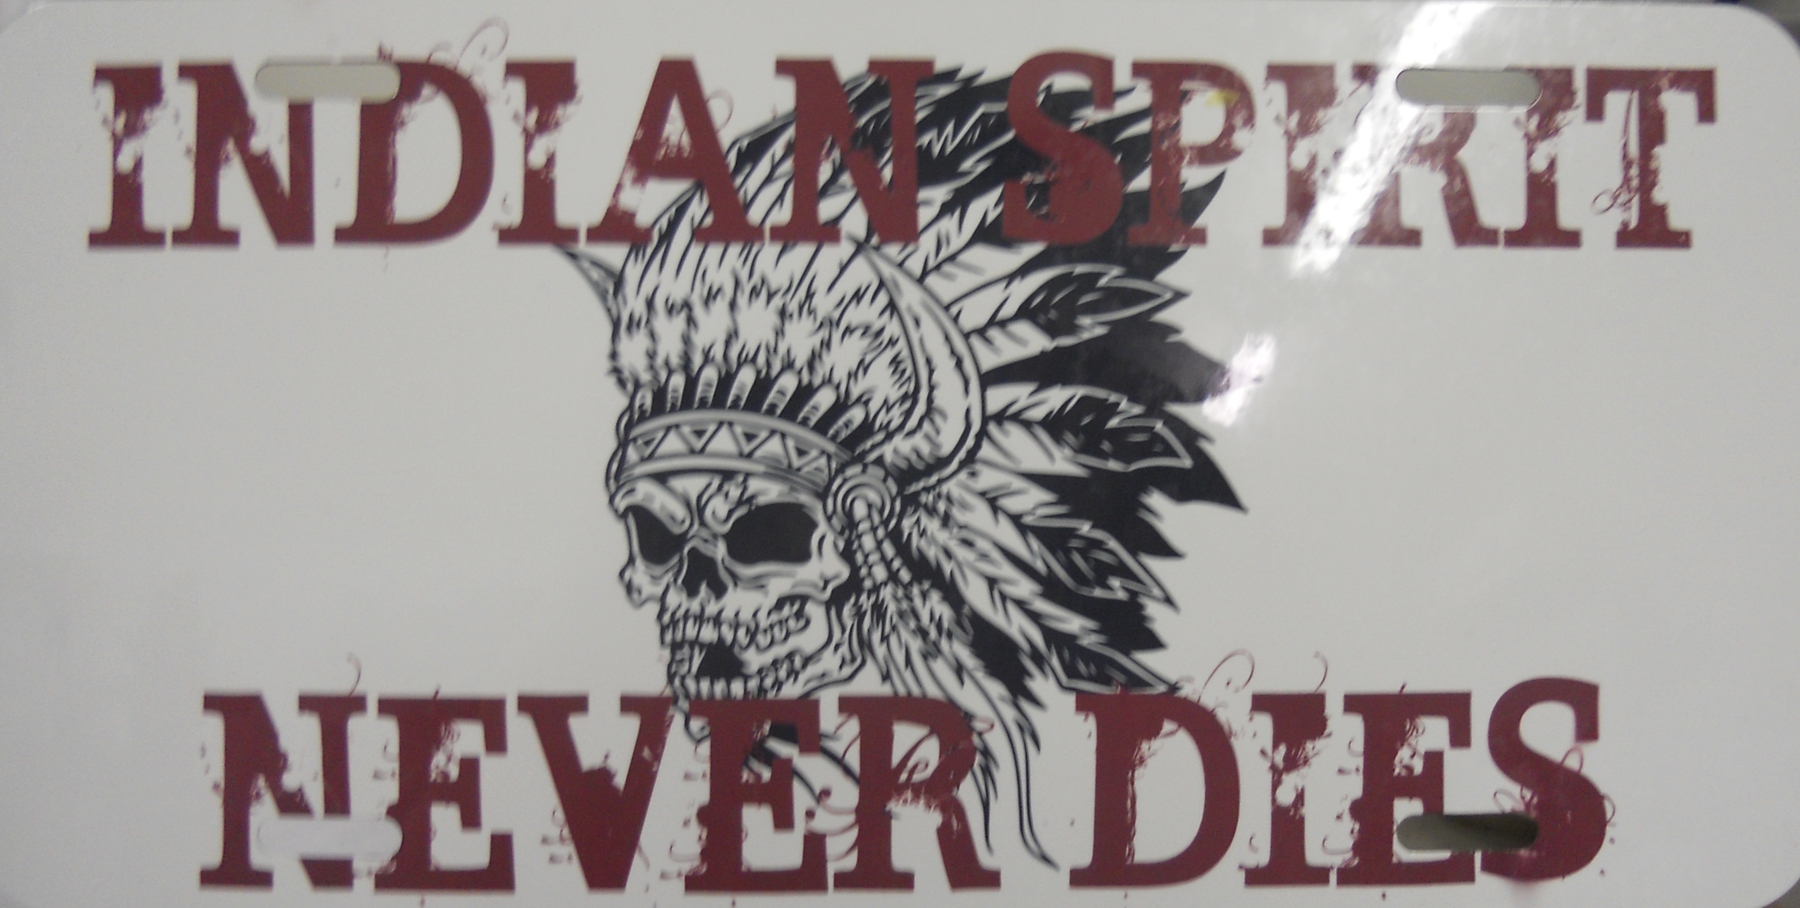 Indian Spirit Liscense Plate made with sublimation printing